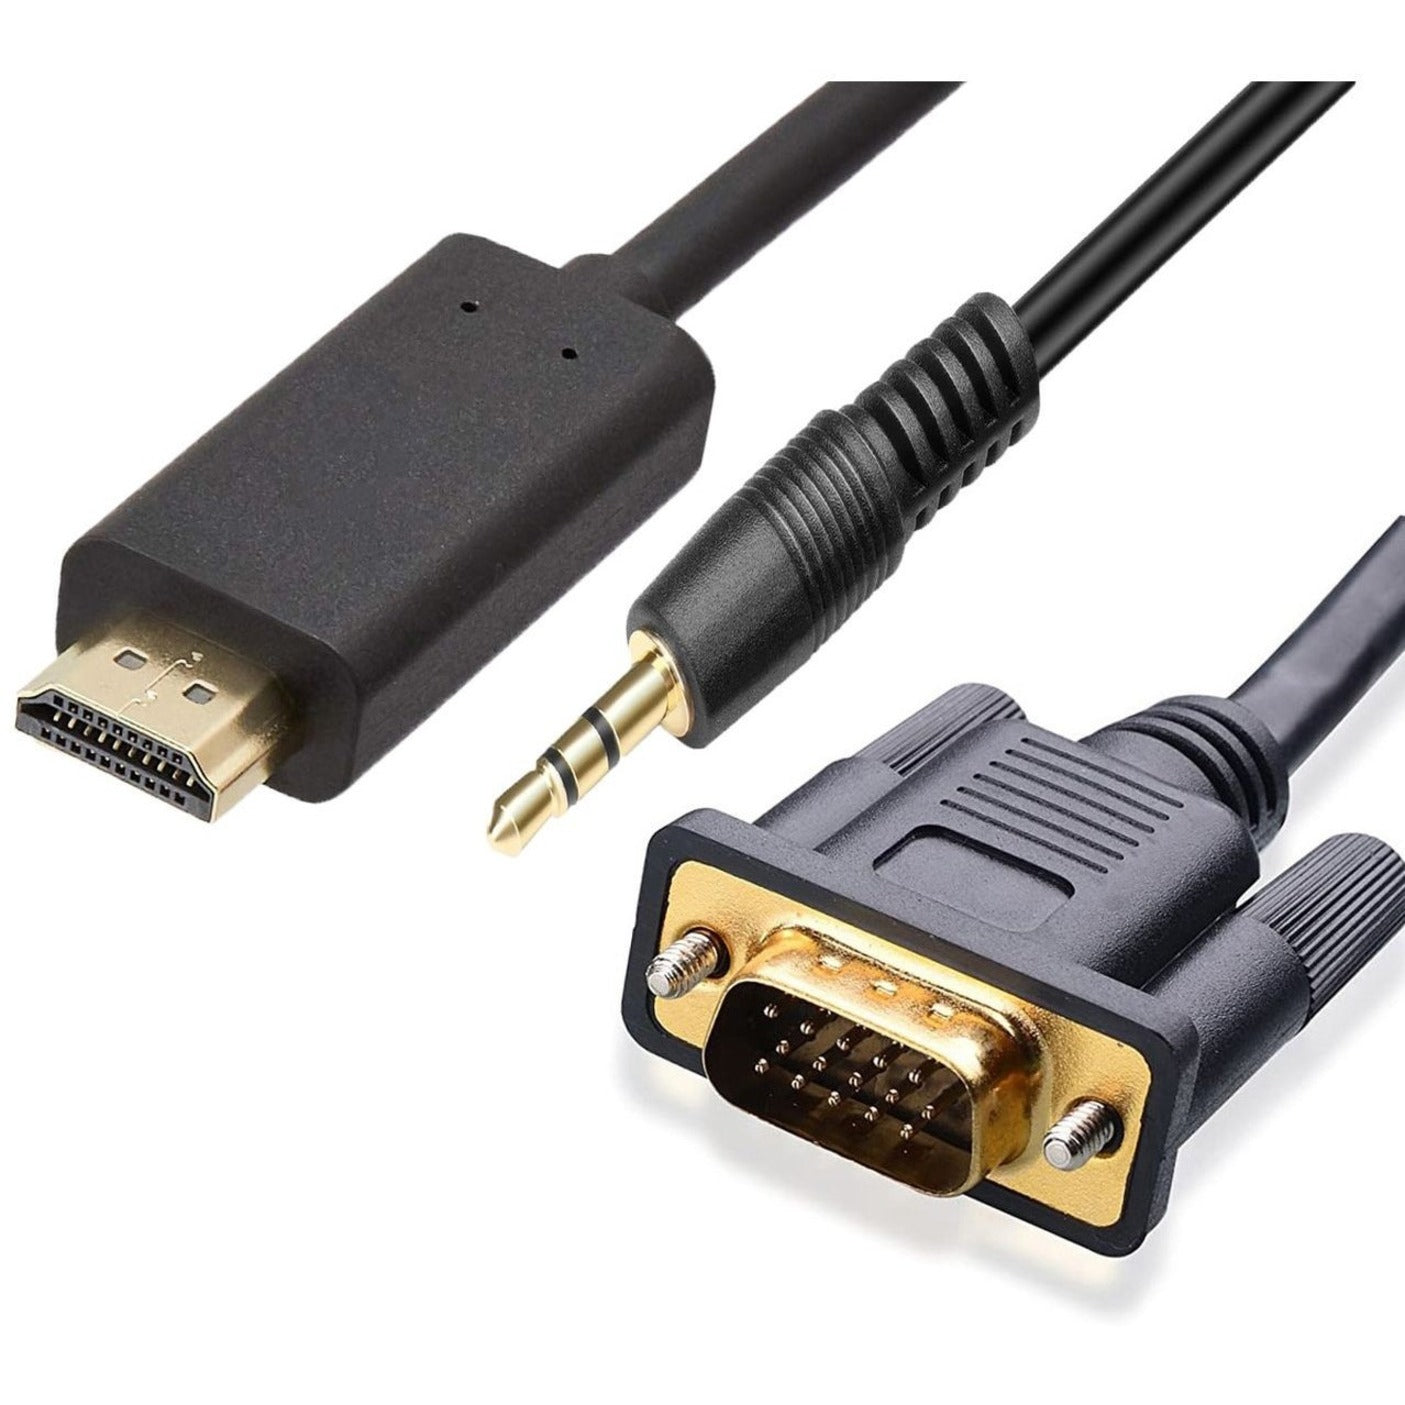 4XEM 4XHDMIVGA3FT HDMI to VGA with 3.5mm Audio Cable, Active, Plug & Play, 3 ft Length